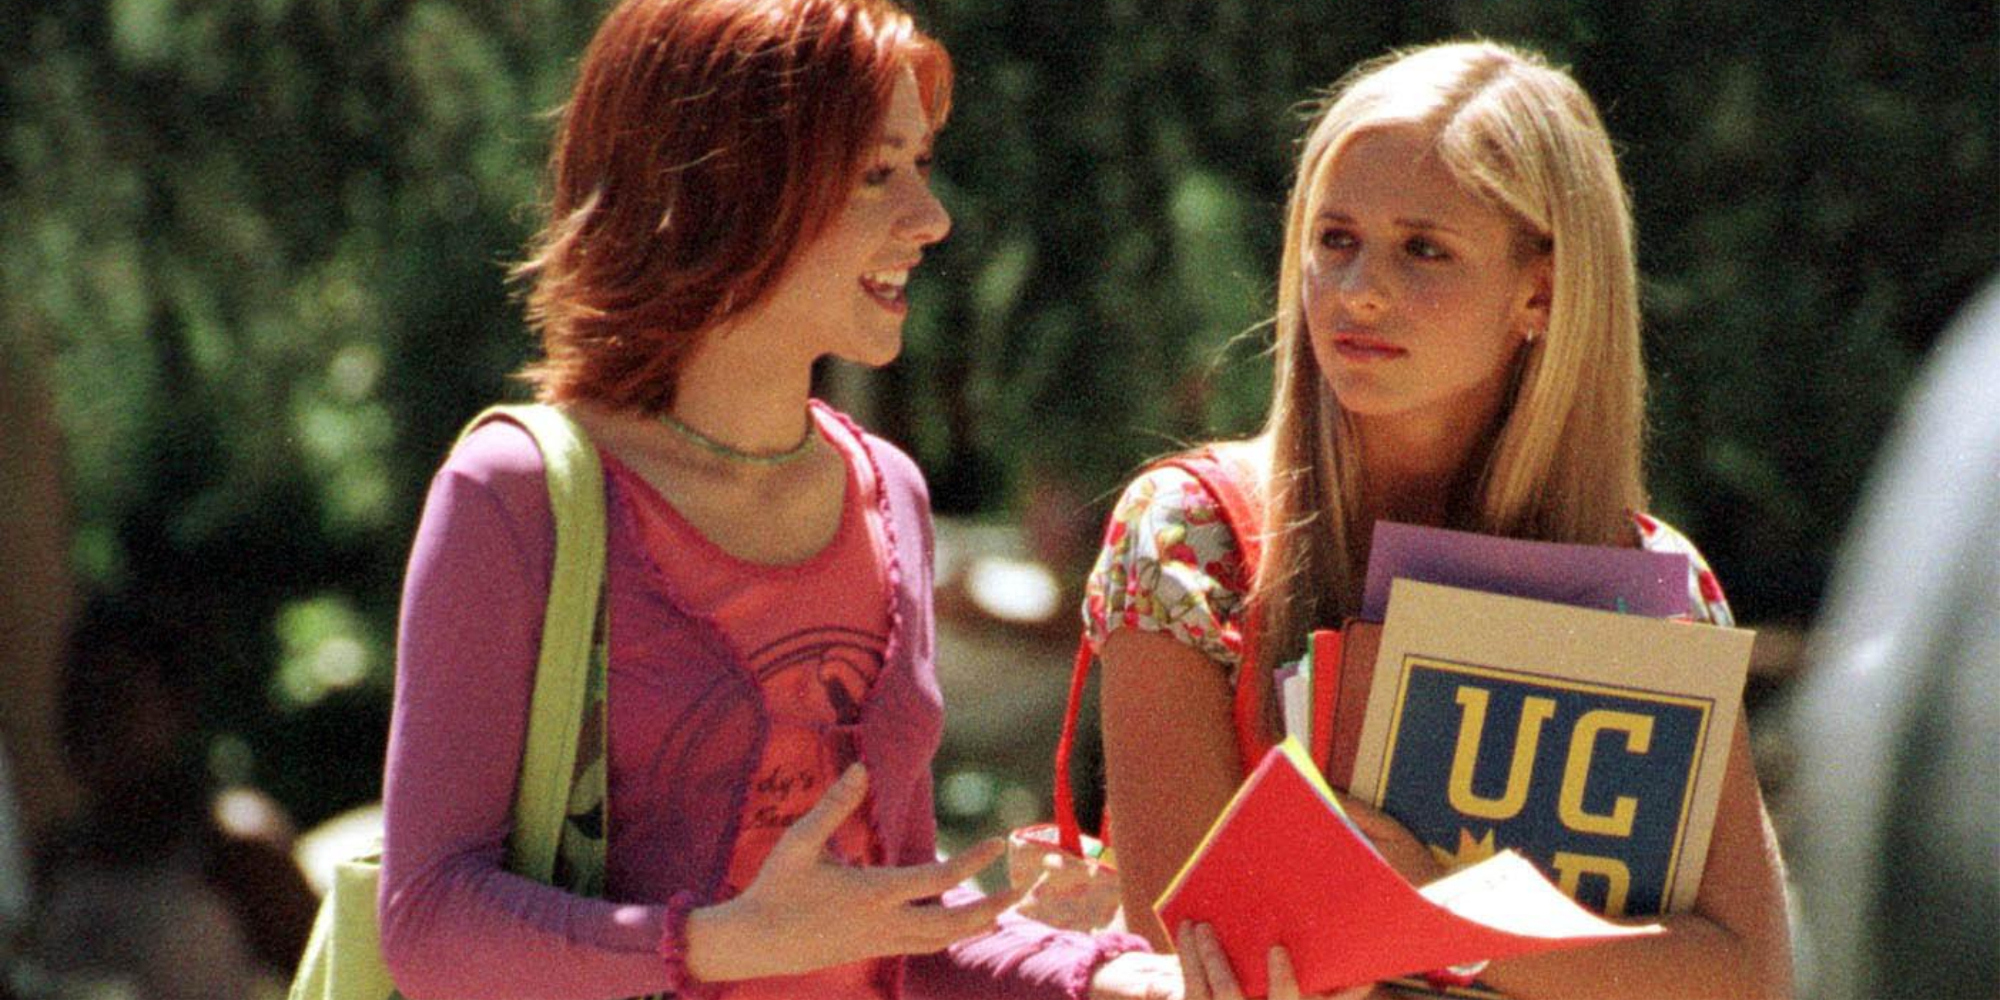 Alyson Hannigan and Sarah Michelle Gellar on the set of 'Buffy the Vampire Slayer' in 1999.